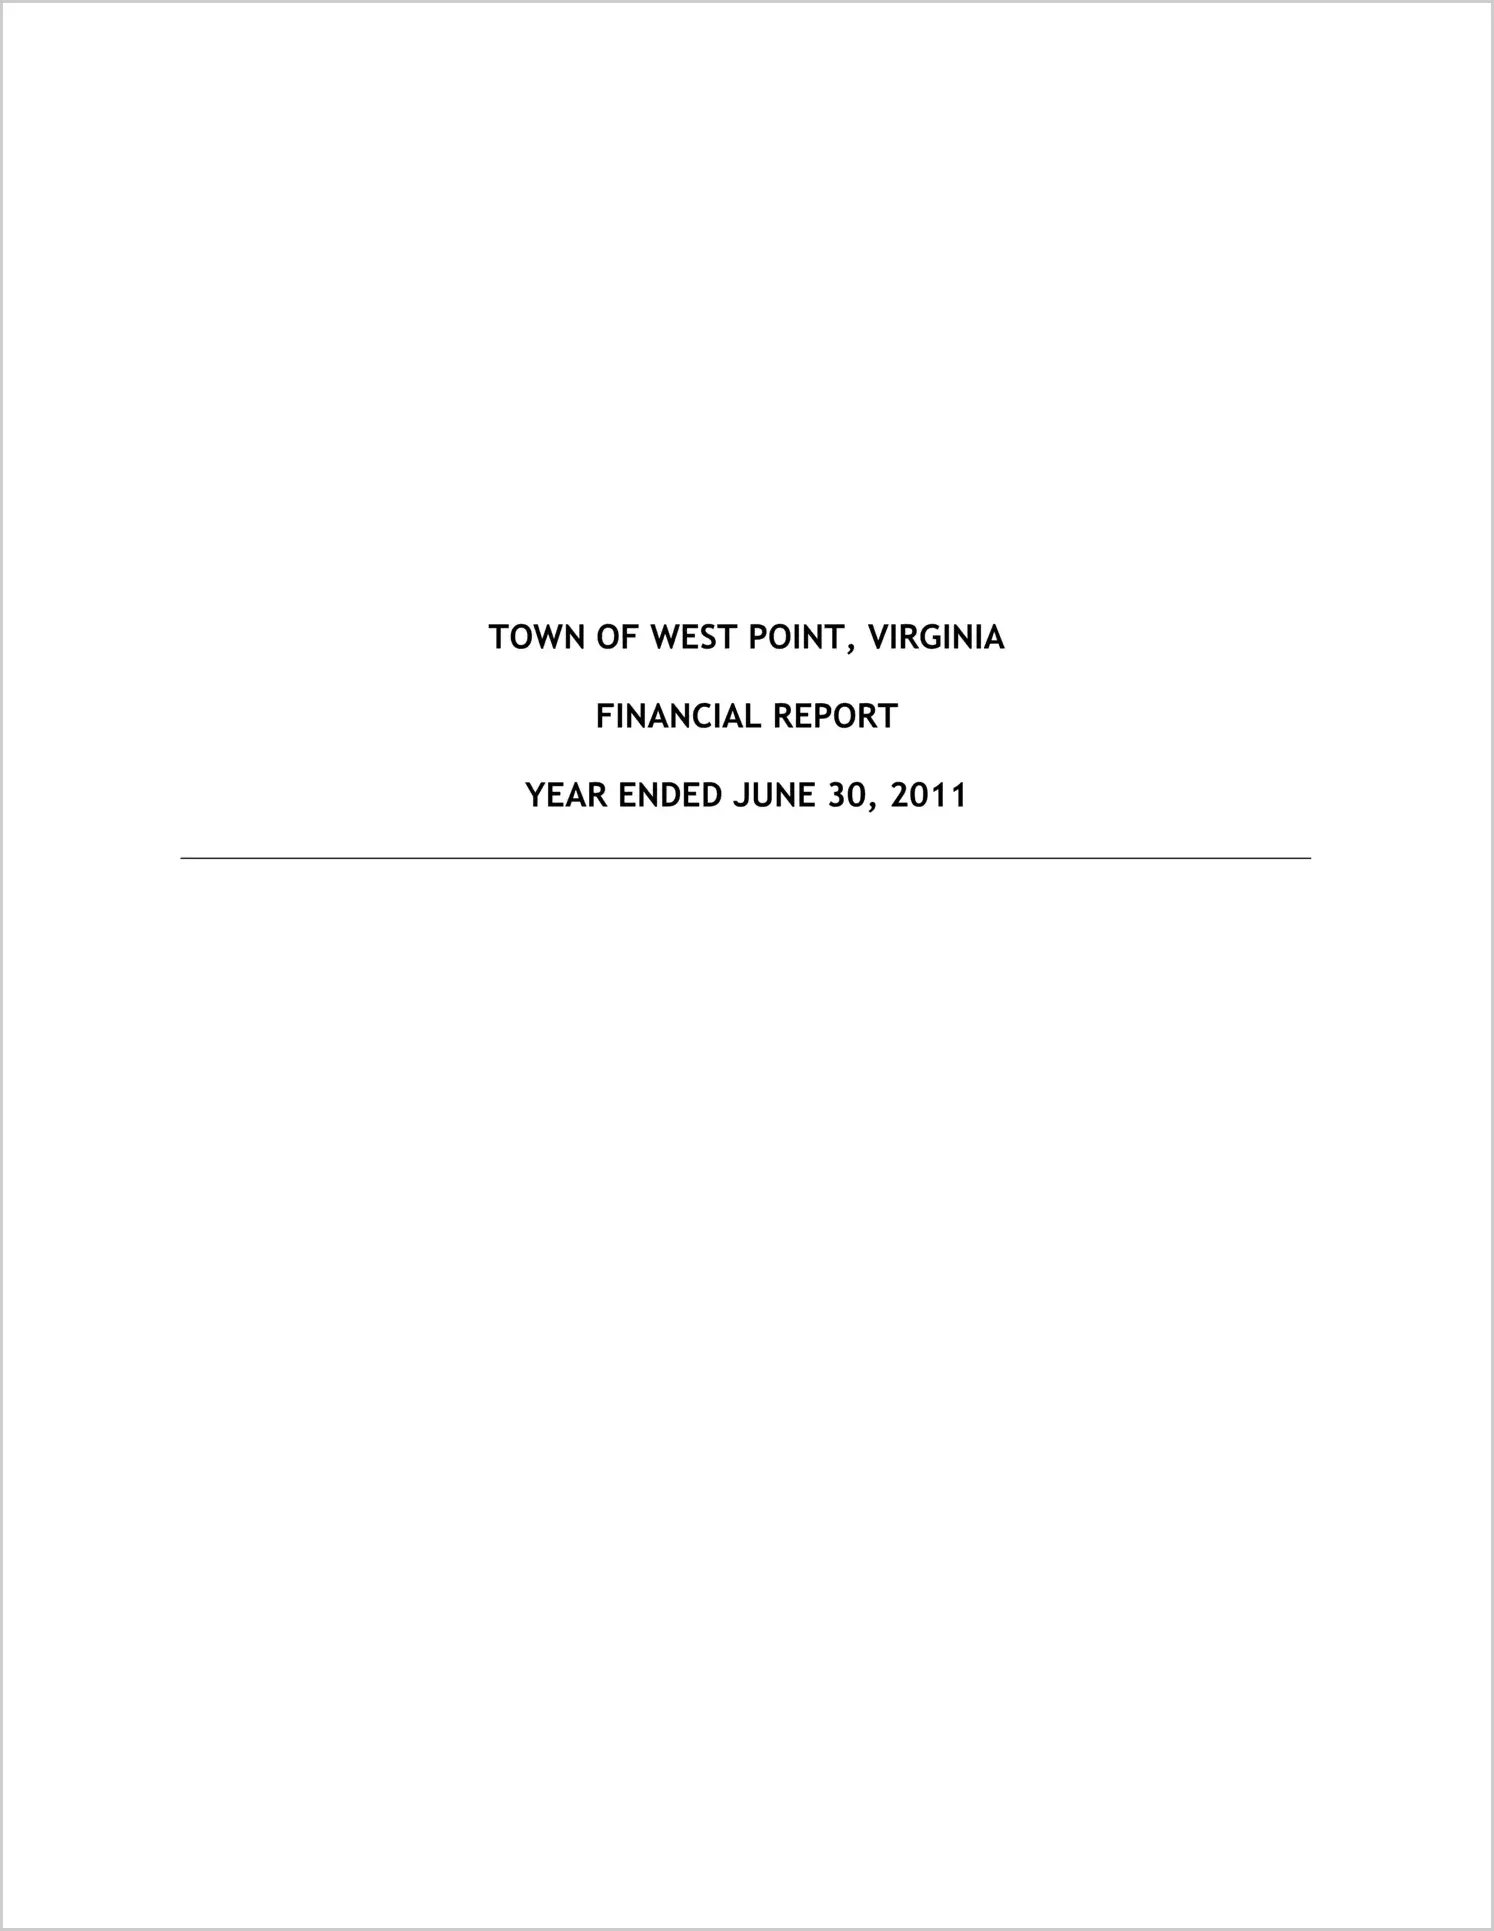 2011 Annual Financial Report for Town of West Point